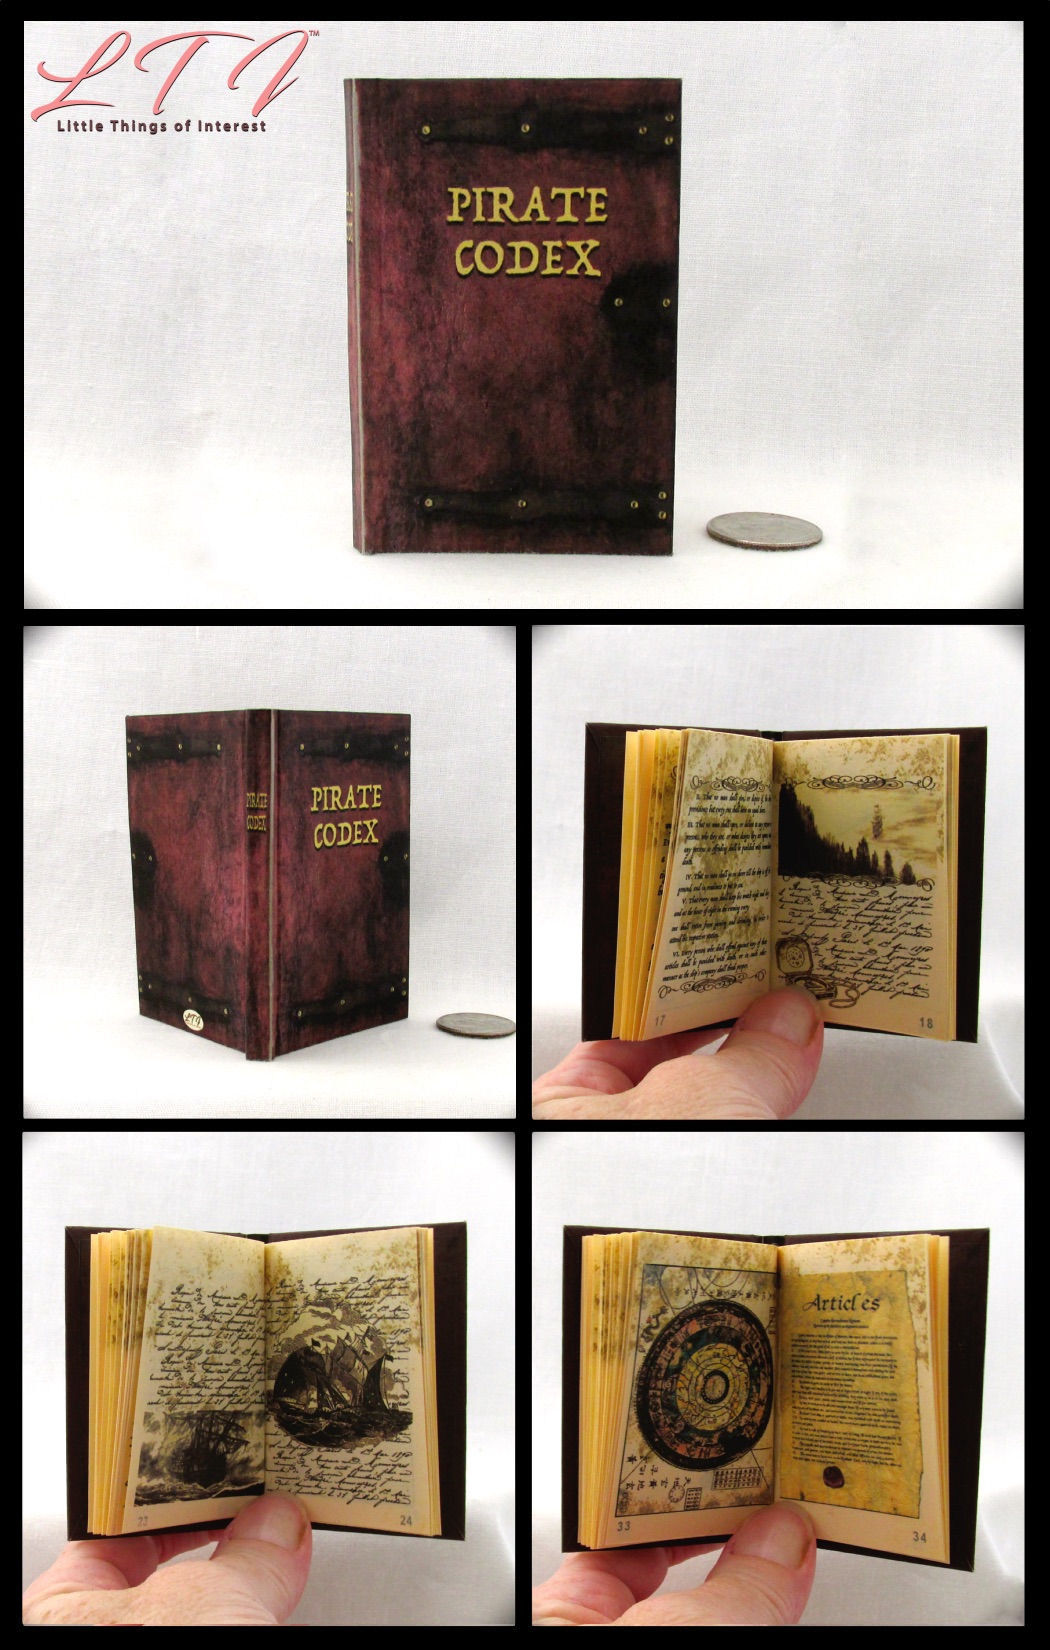 THE PIRATE CODEX Miniature Book Dollhouse 1:12 Scale Readable Illustrated Code 